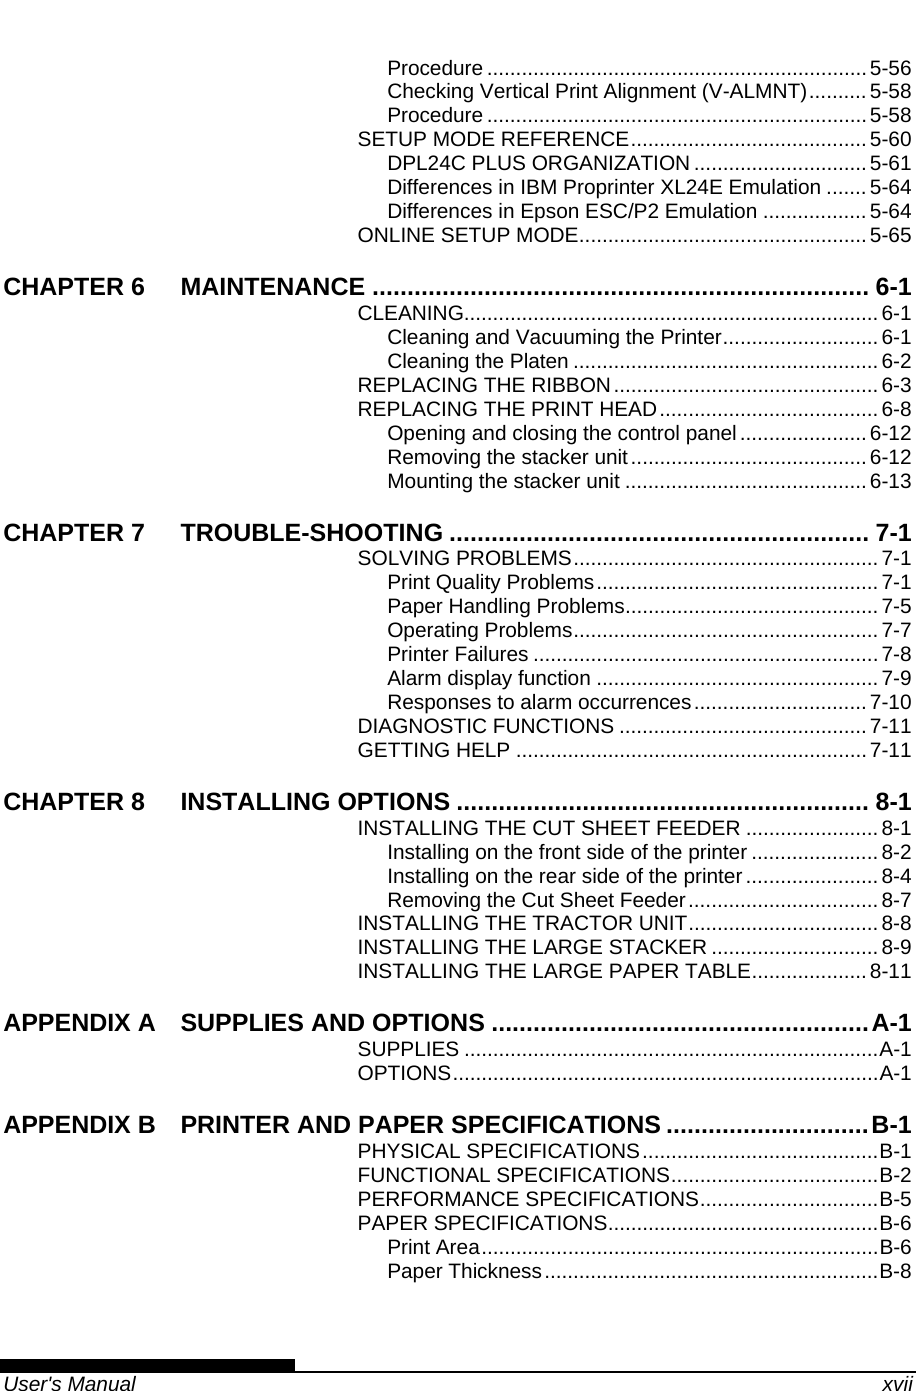   User&apos;s Manual    xvii Procedure ..................................................................5-56 Checking Vertical Print Alignment (V-ALMNT)..........5-58 Procedure ..................................................................5-58 SETUP MODE REFERENCE......................................... 5-60 DPL24C PLUS ORGANIZATION ..............................5-61 Differences in IBM Proprinter XL24E Emulation ....... 5-64 Differences in Epson ESC/P2 Emulation ..................5-64 ONLINE SETUP MODE.................................................. 5-65 CHAPTER 6 MAINTENANCE ....................................................................... 6-1 CLEANING........................................................................6-1 Cleaning and Vacuuming the Printer........................... 6-1 Cleaning the Platen ..................................................... 6-2 REPLACING THE RIBBON..............................................6-3 REPLACING THE PRINT HEAD...................................... 6-8 Opening and closing the control panel......................6-12 Removing the stacker unit.........................................6-12 Mounting the stacker unit ..........................................6-13 CHAPTER 7 TROUBLE-SHOOTING ............................................................ 7-1 SOLVING PROBLEMS..................................................... 7-1 Print Quality Problems.................................................7-1 Paper Handling Problems............................................ 7-5 Operating Problems..................................................... 7-7 Printer Failures ............................................................7-8 Alarm display function .................................................7-9 Responses to alarm occurrences..............................7-10 DIAGNOSTIC FUNCTIONS ...........................................7-11 GETTING HELP .............................................................7-11 CHAPTER 8 INSTALLING OPTIONS ........................................................... 8-1 INSTALLING THE CUT SHEET FEEDER .......................8-1 Installing on the front side of the printer ...................... 8-2 Installing on the rear side of the printer ....................... 8-4 Removing the Cut Sheet Feeder................................. 8-7 INSTALLING THE TRACTOR UNIT................................. 8-8 INSTALLING THE LARGE STACKER ............................. 8-9 INSTALLING THE LARGE PAPER TABLE.................... 8-11 APPENDIX A SUPPLIES AND OPTIONS ......................................................A-1 SUPPLIES ........................................................................A-1 OPTIONS..........................................................................A-1 APPENDIX B PRINTER AND PAPER SPECIFICATIONS .............................B-1 PHYSICAL SPECIFICATIONS.........................................B-1 FUNCTIONAL SPECIFICATIONS....................................B-2 PERFORMANCE SPECIFICATIONS...............................B-5 PAPER SPECIFICATIONS...............................................B-6 Print Area.....................................................................B-6 Paper Thickness..........................................................B-8 